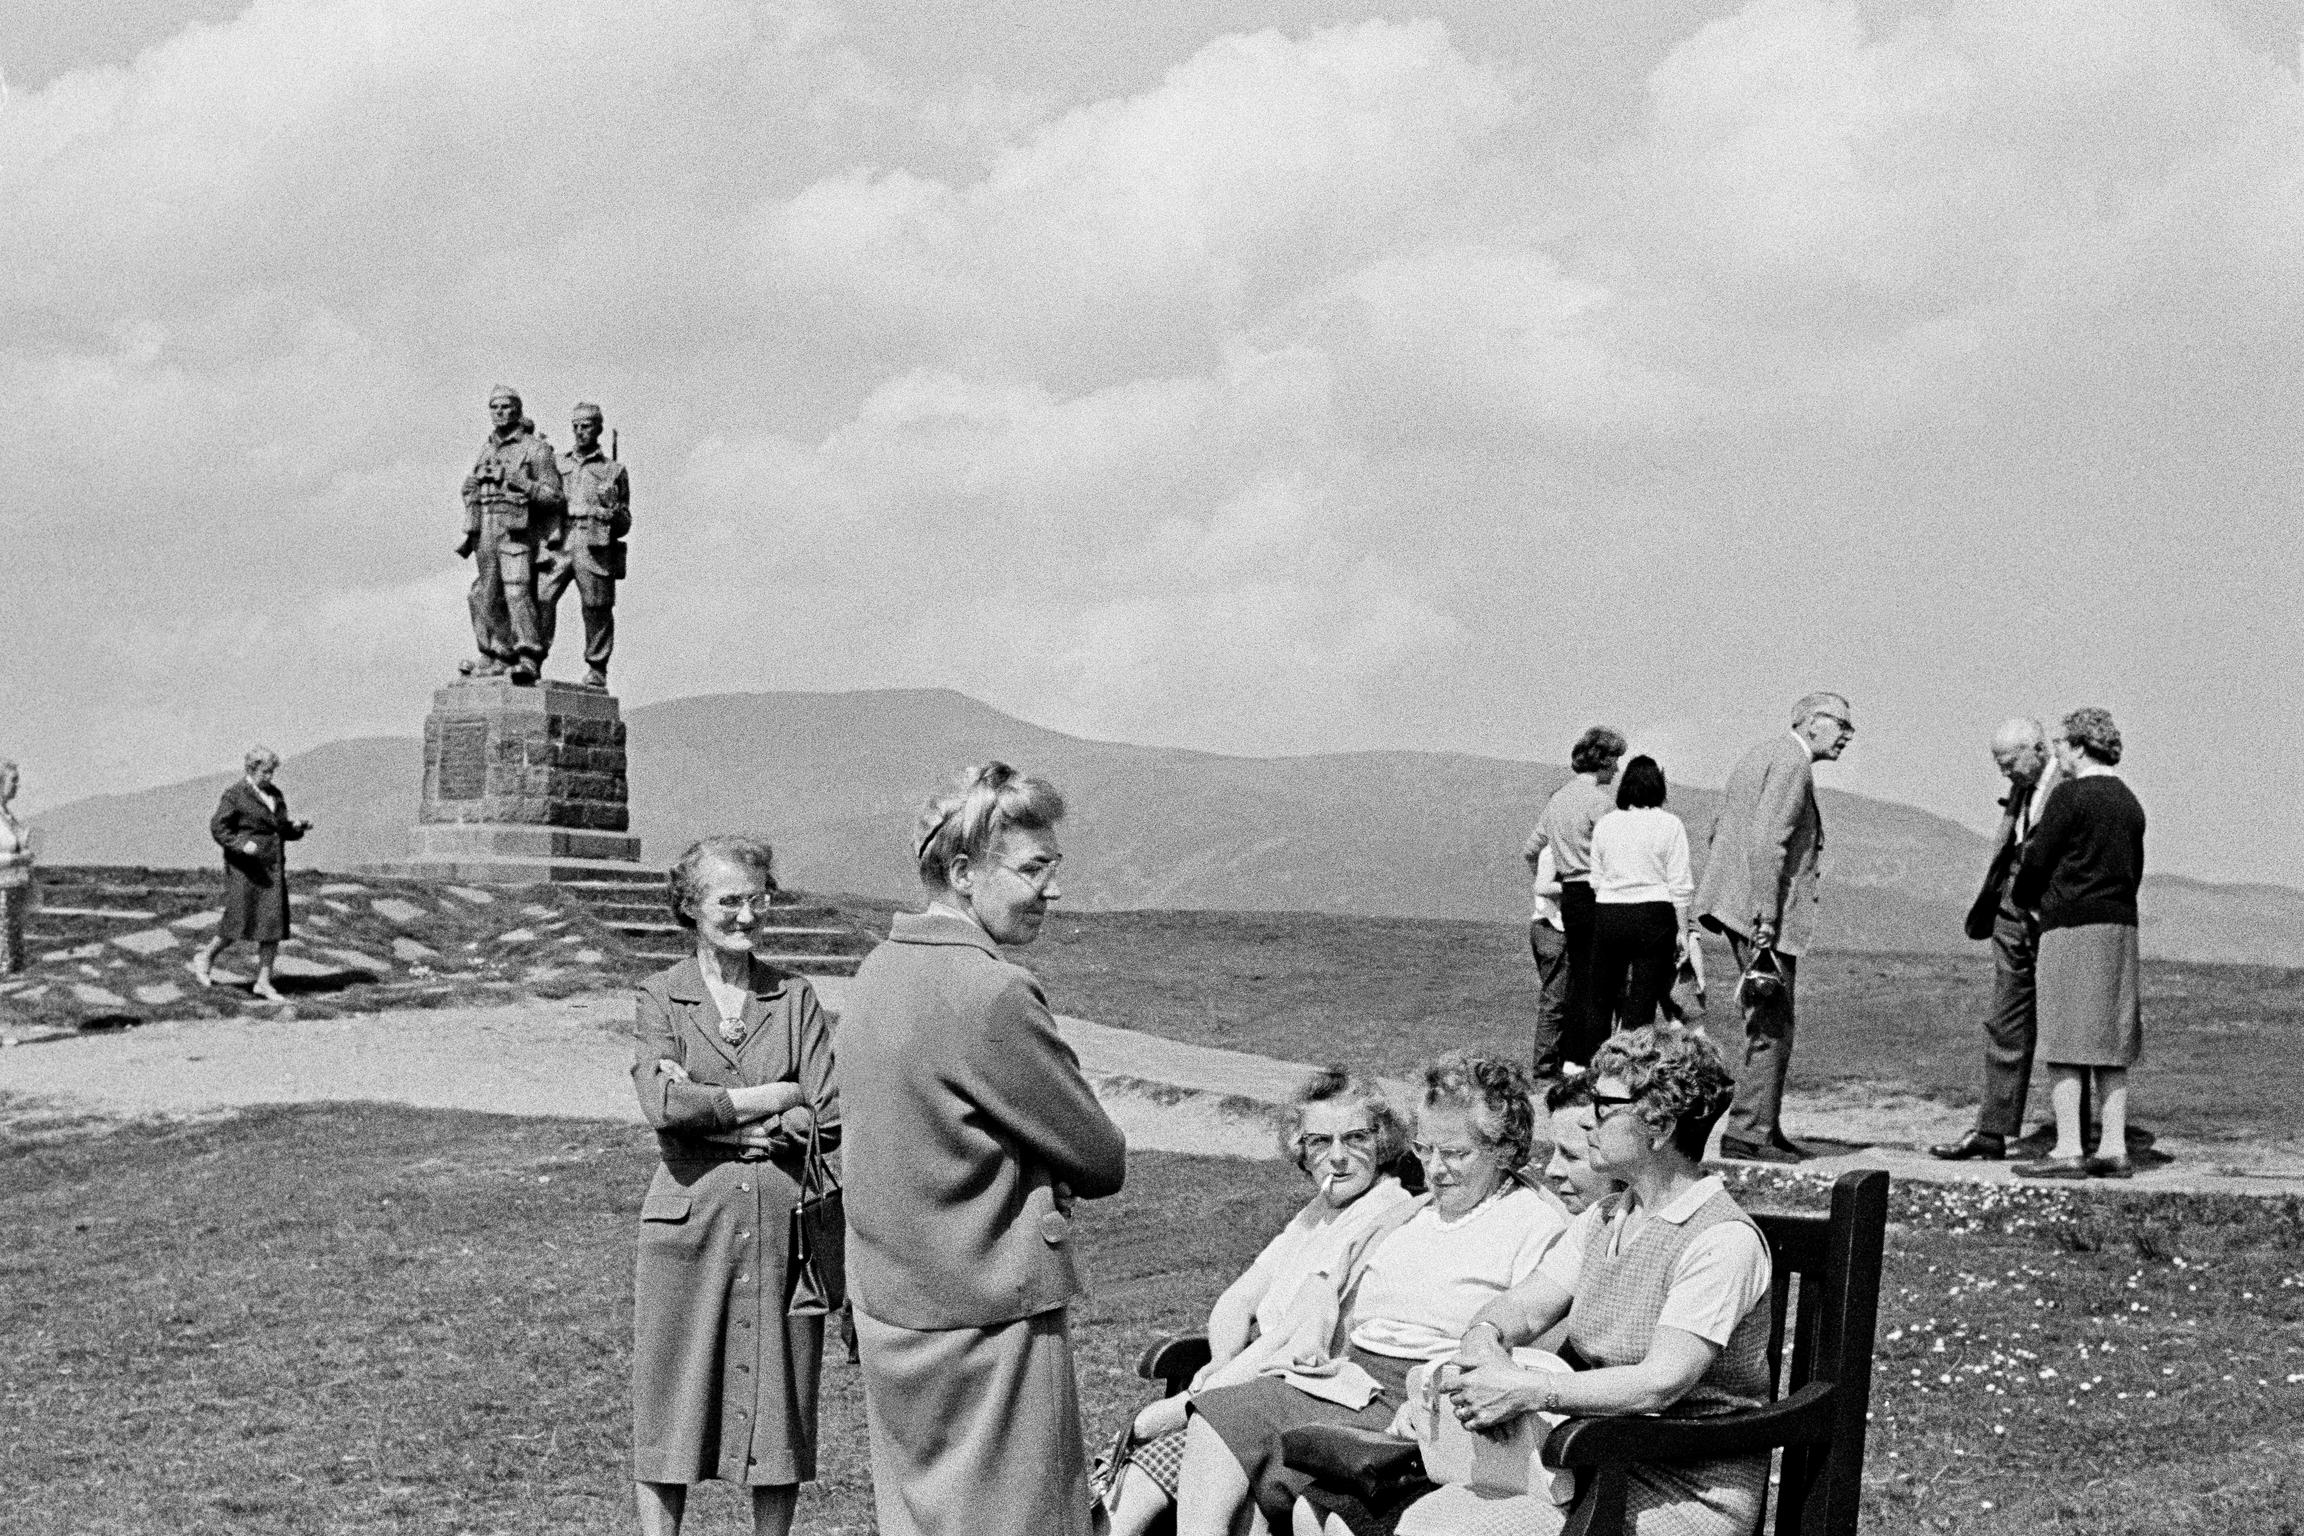 The Commando Memorial is a Category A listed monument in Scotland, dedicated to the men of the original British Commando Forces raised during World War II. Scotland